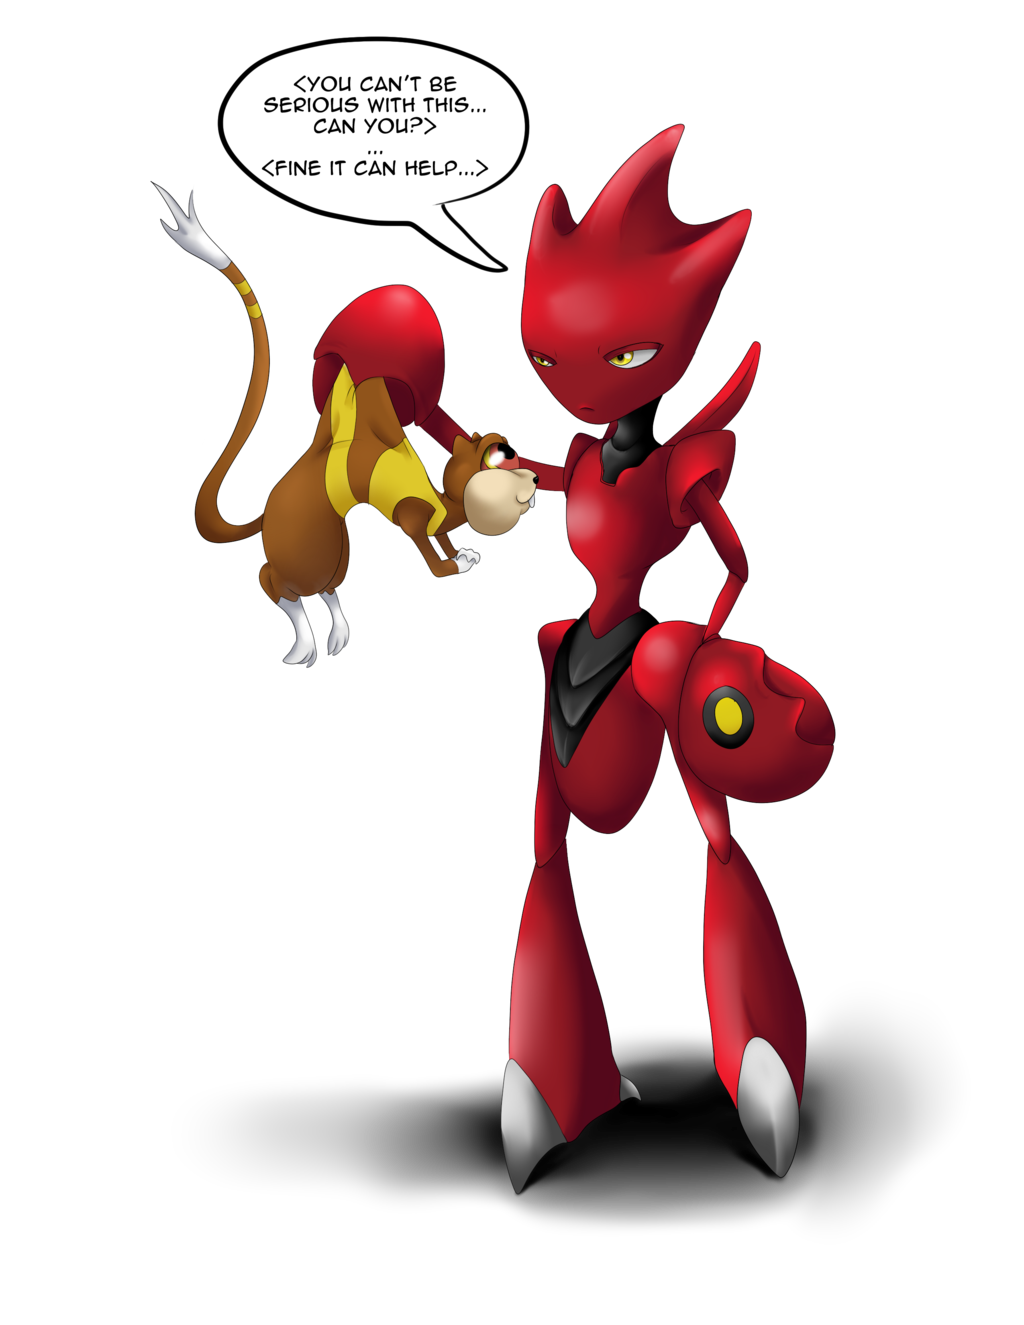 Watchog With Scizor Is Scary By Pinafta1